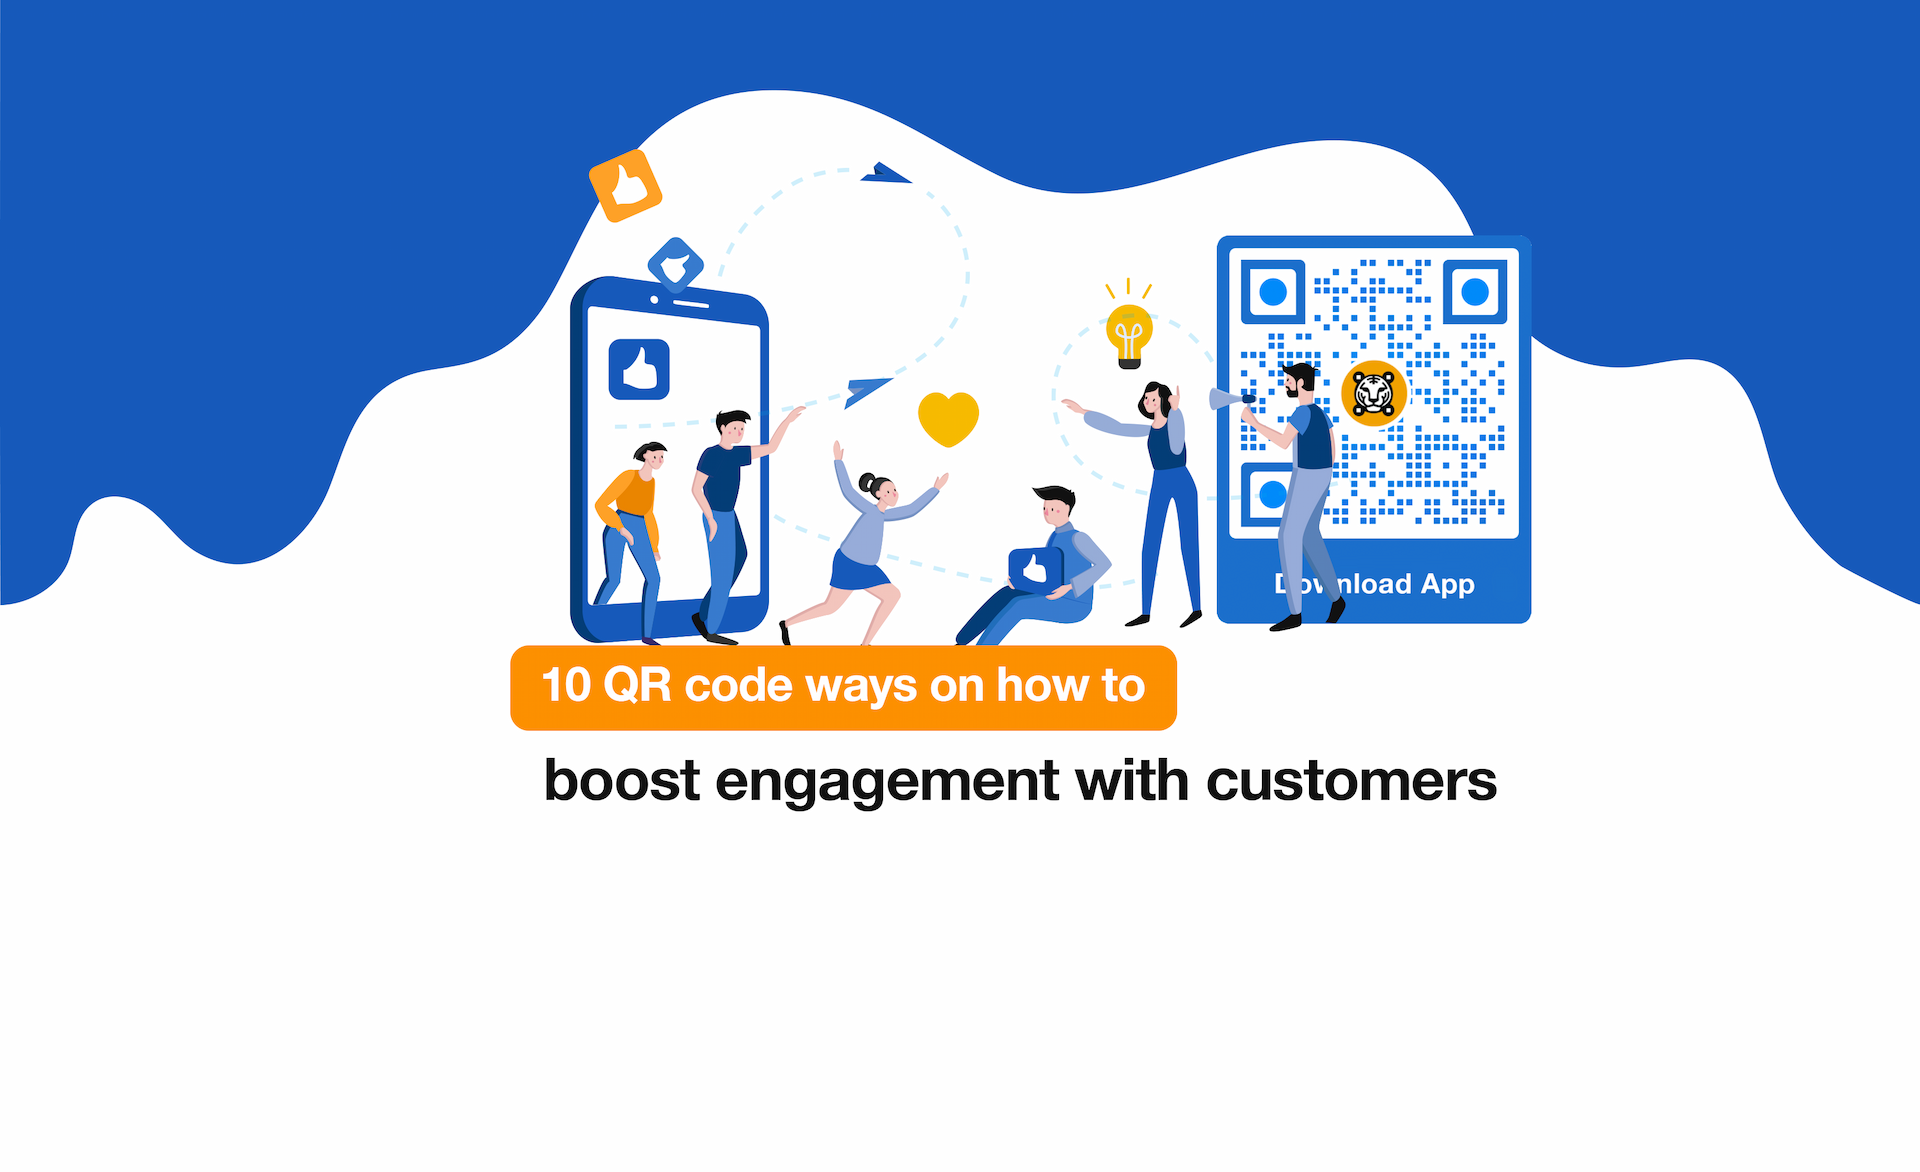 10 Ways to Boost Customer Engagement Using QR Codes